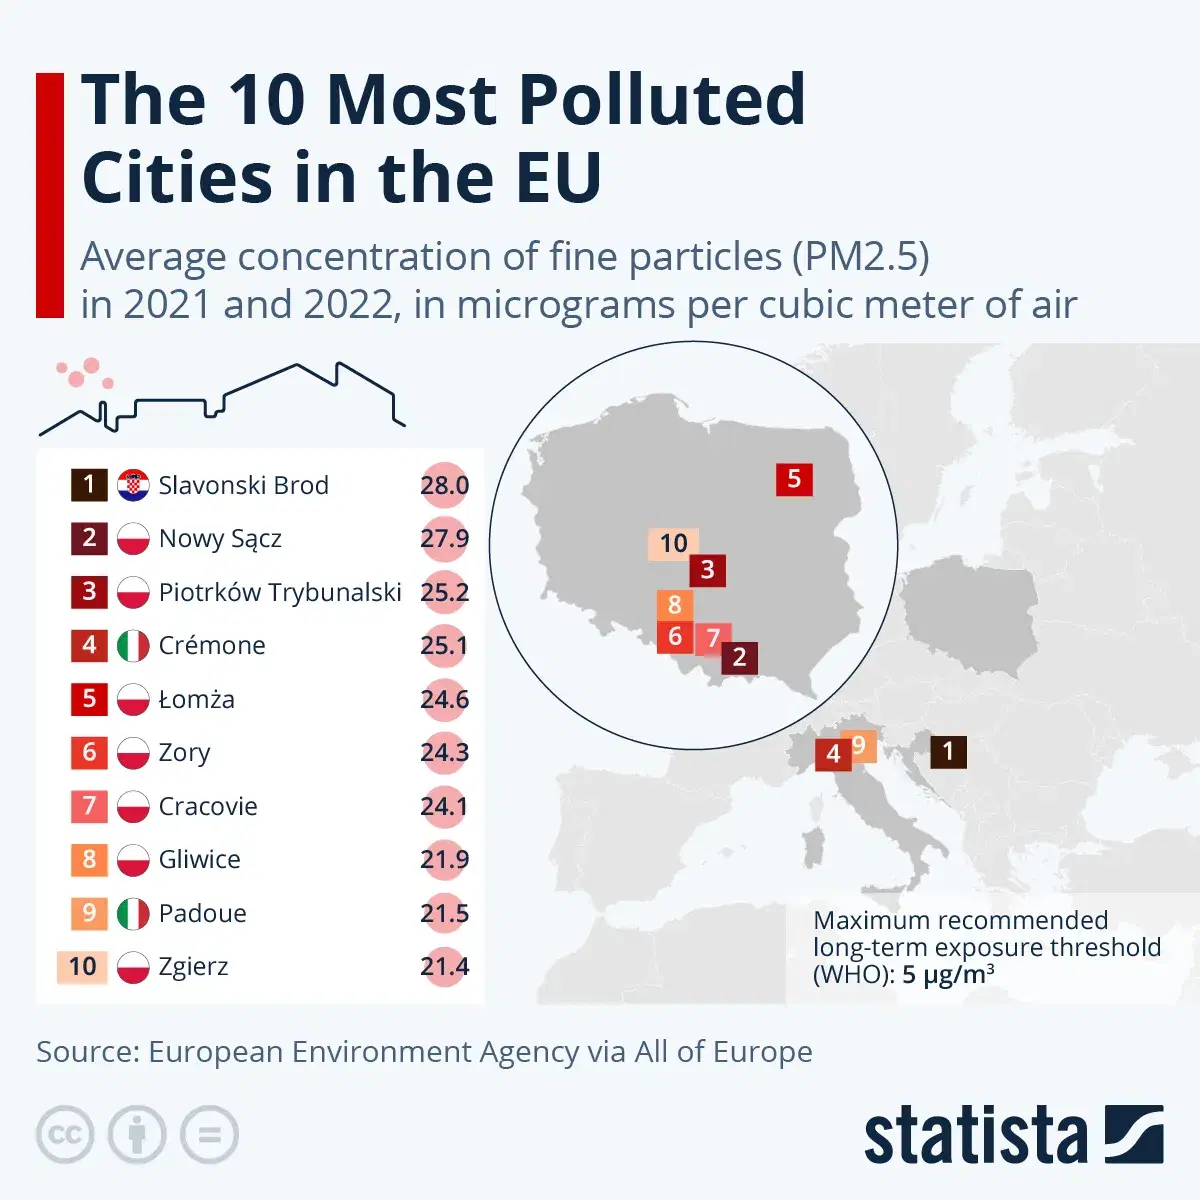 The 10 Most Polluted Cities in the European Union